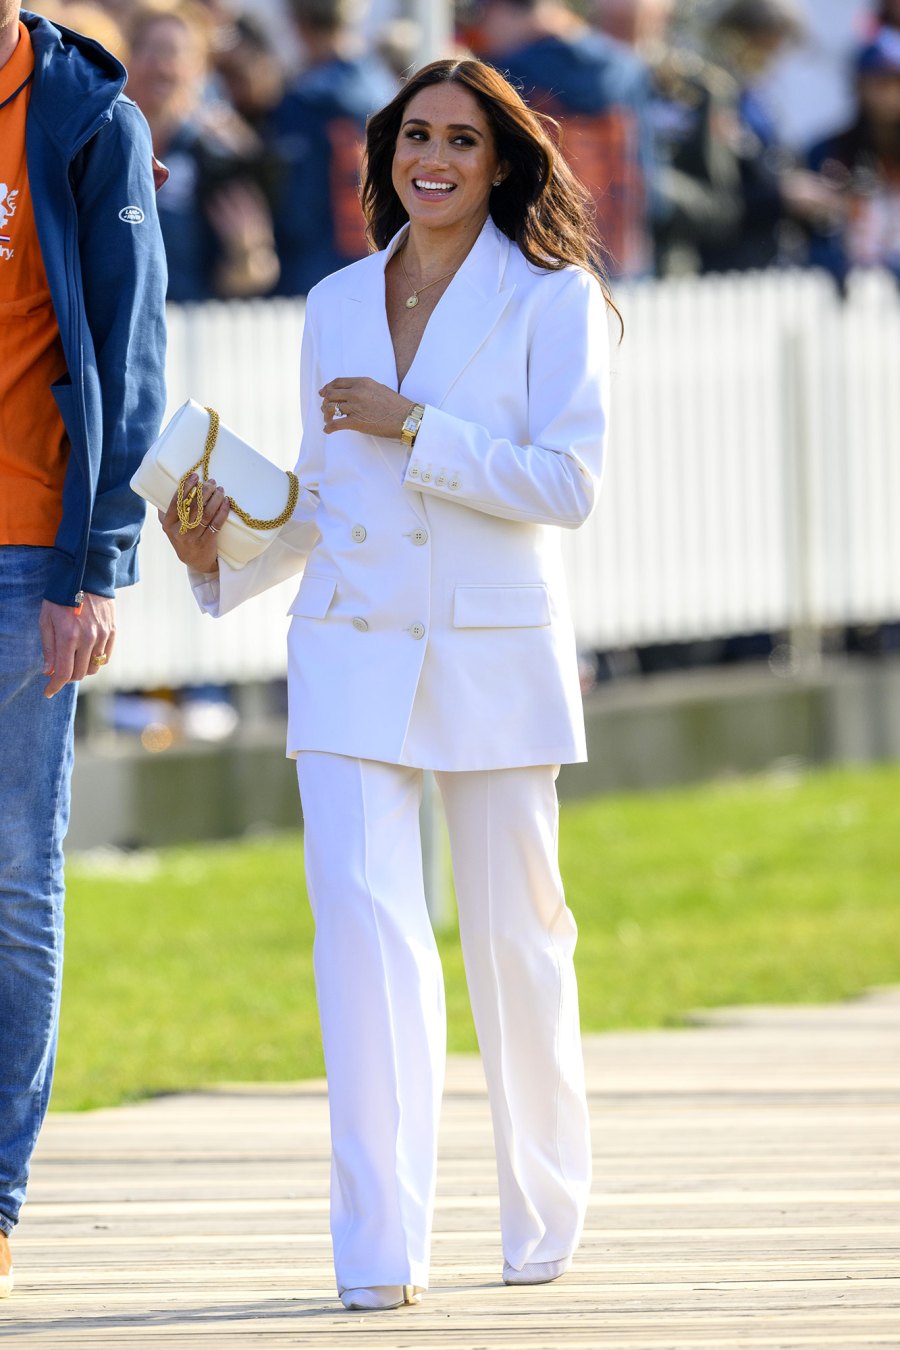 April 15 2022 Meghan Markle Best Looks Since Stepping Away From Senior Royal Duties